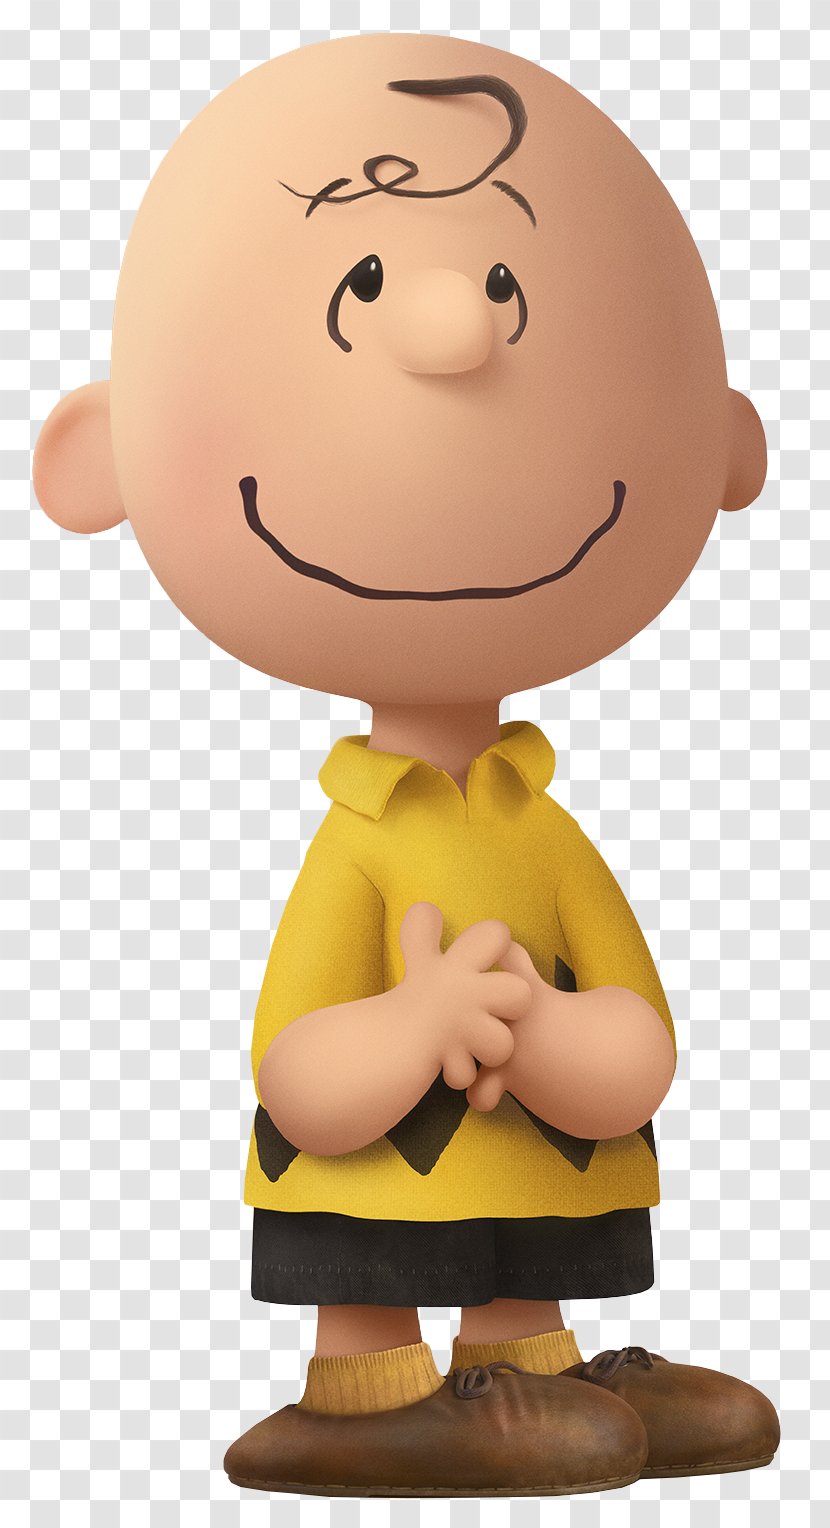 Charlie Brown Snoopy Linus Van Pelt Lucy Sally - And Show - Peanuts Transparent PNG